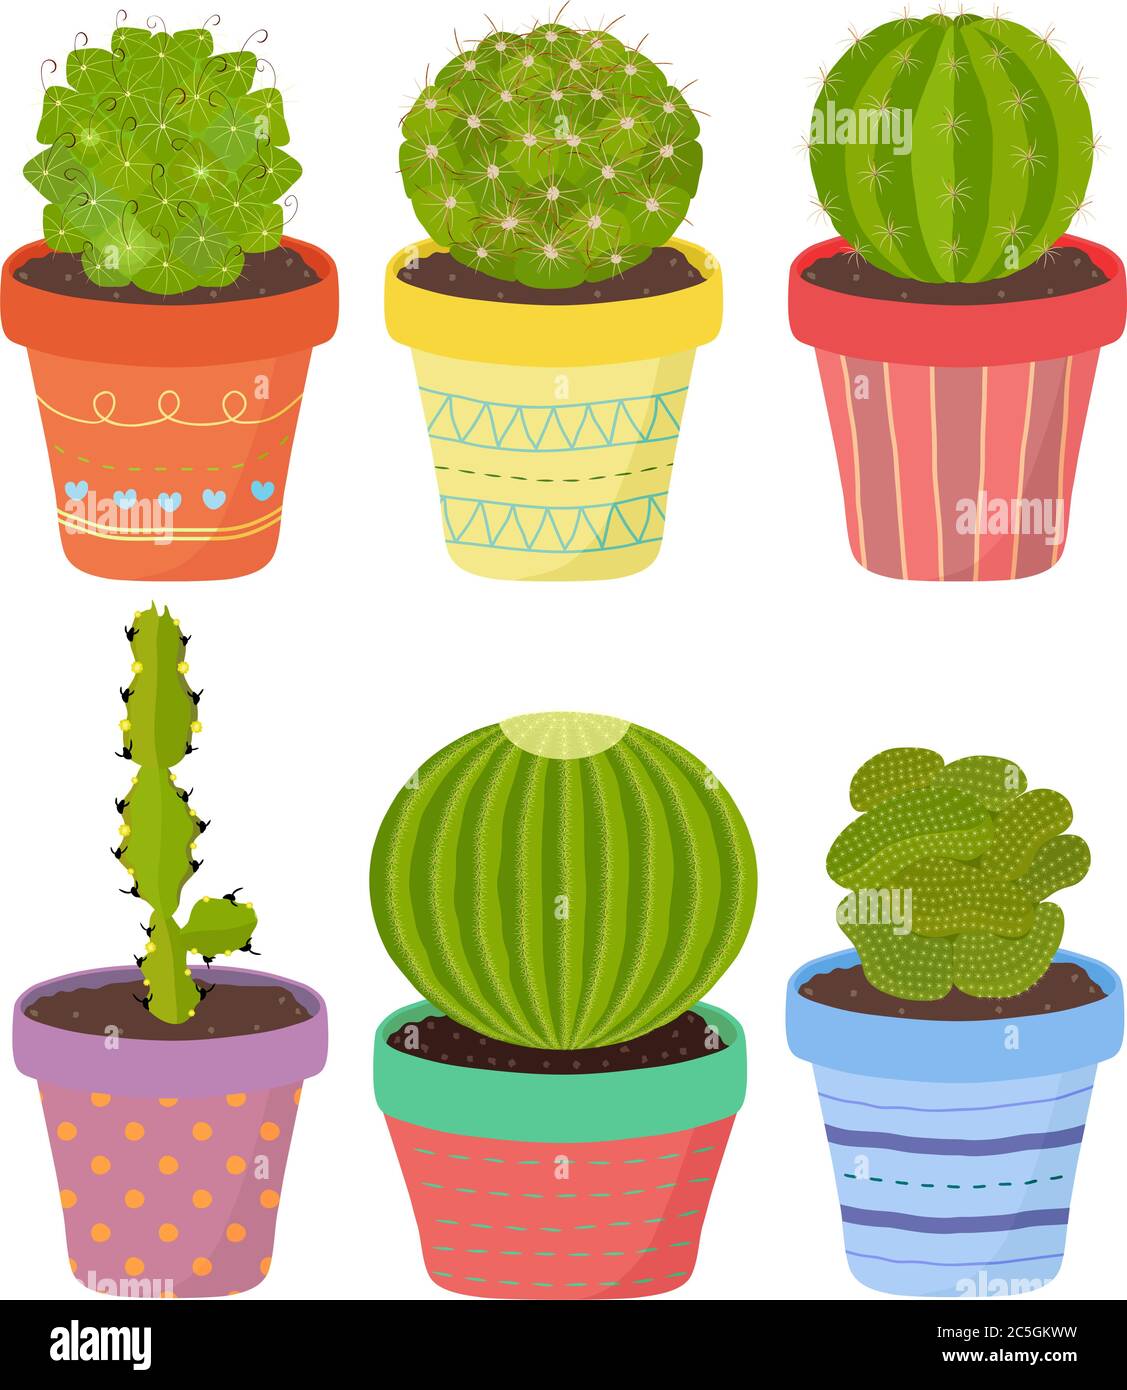 Vector set of cactus cacti aloe succulent plants in pot. Collection of flat styled hand drawn exotic houseplant. Cute illustration isolated on white. Stock Vector